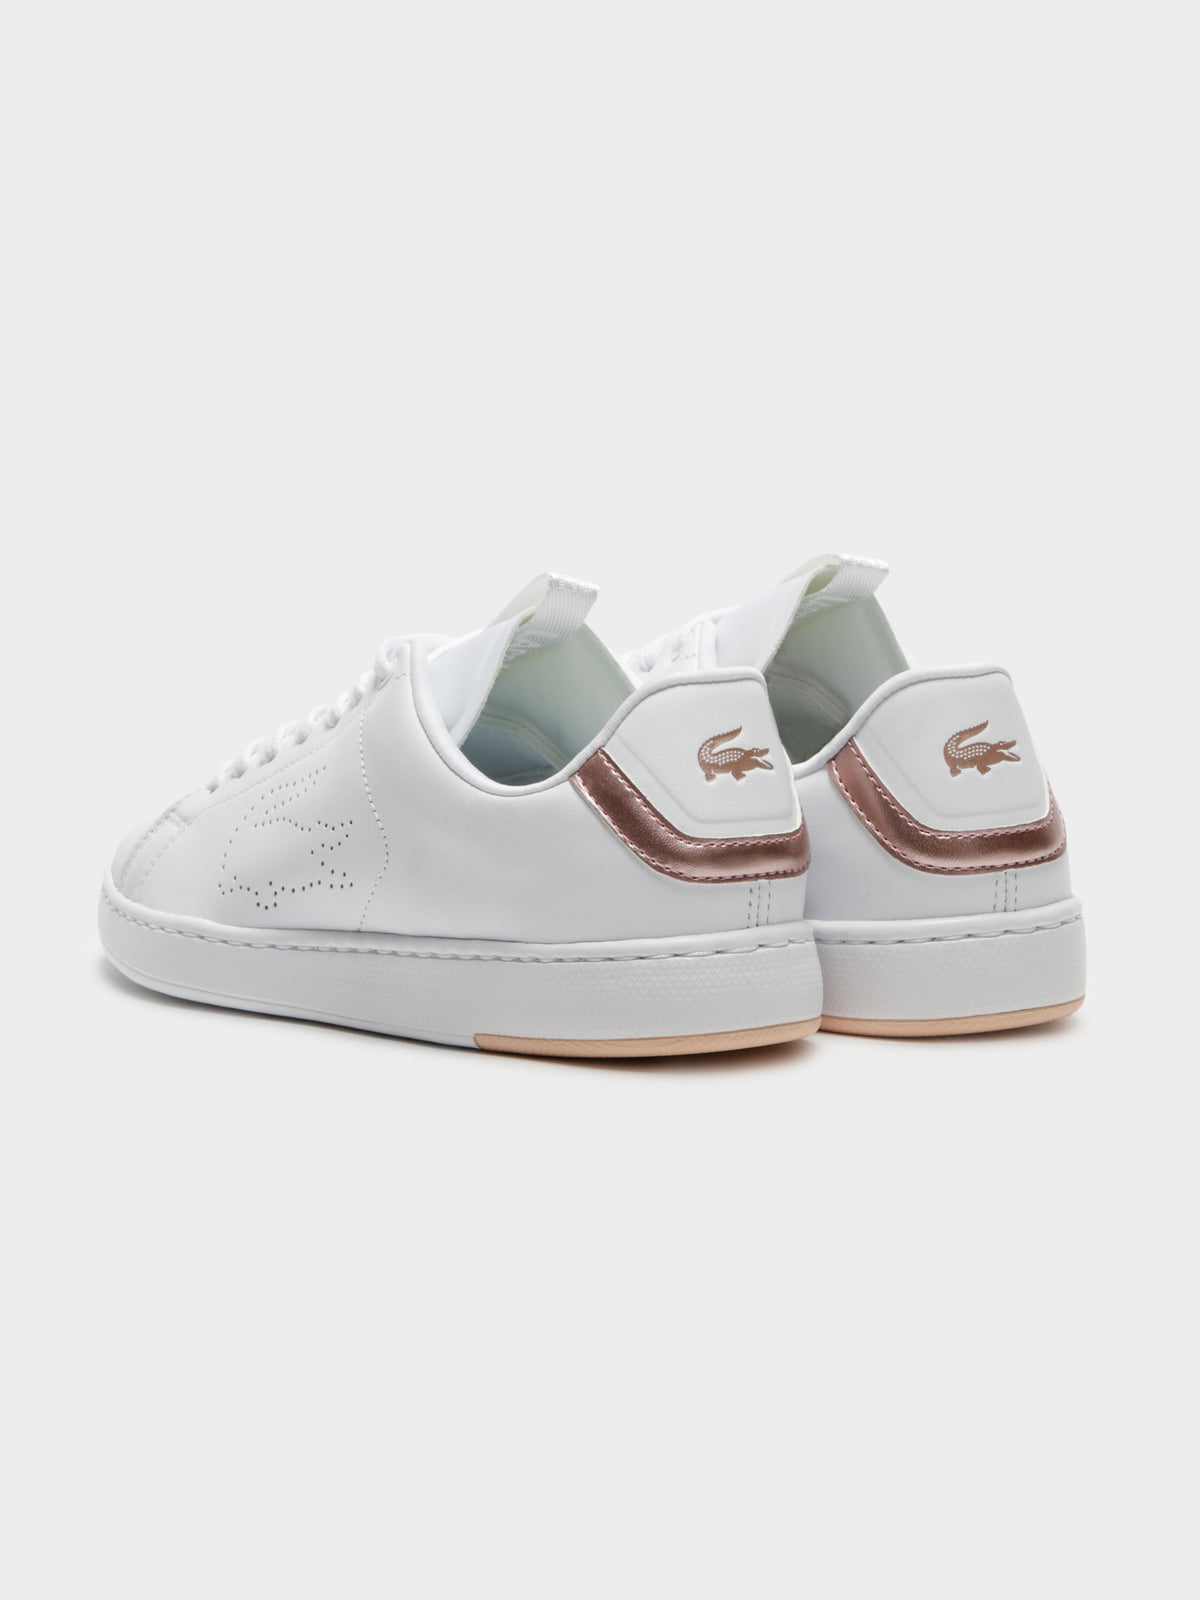 Womens Carnaby Evo 1193 Sneakers in White and Light Pink